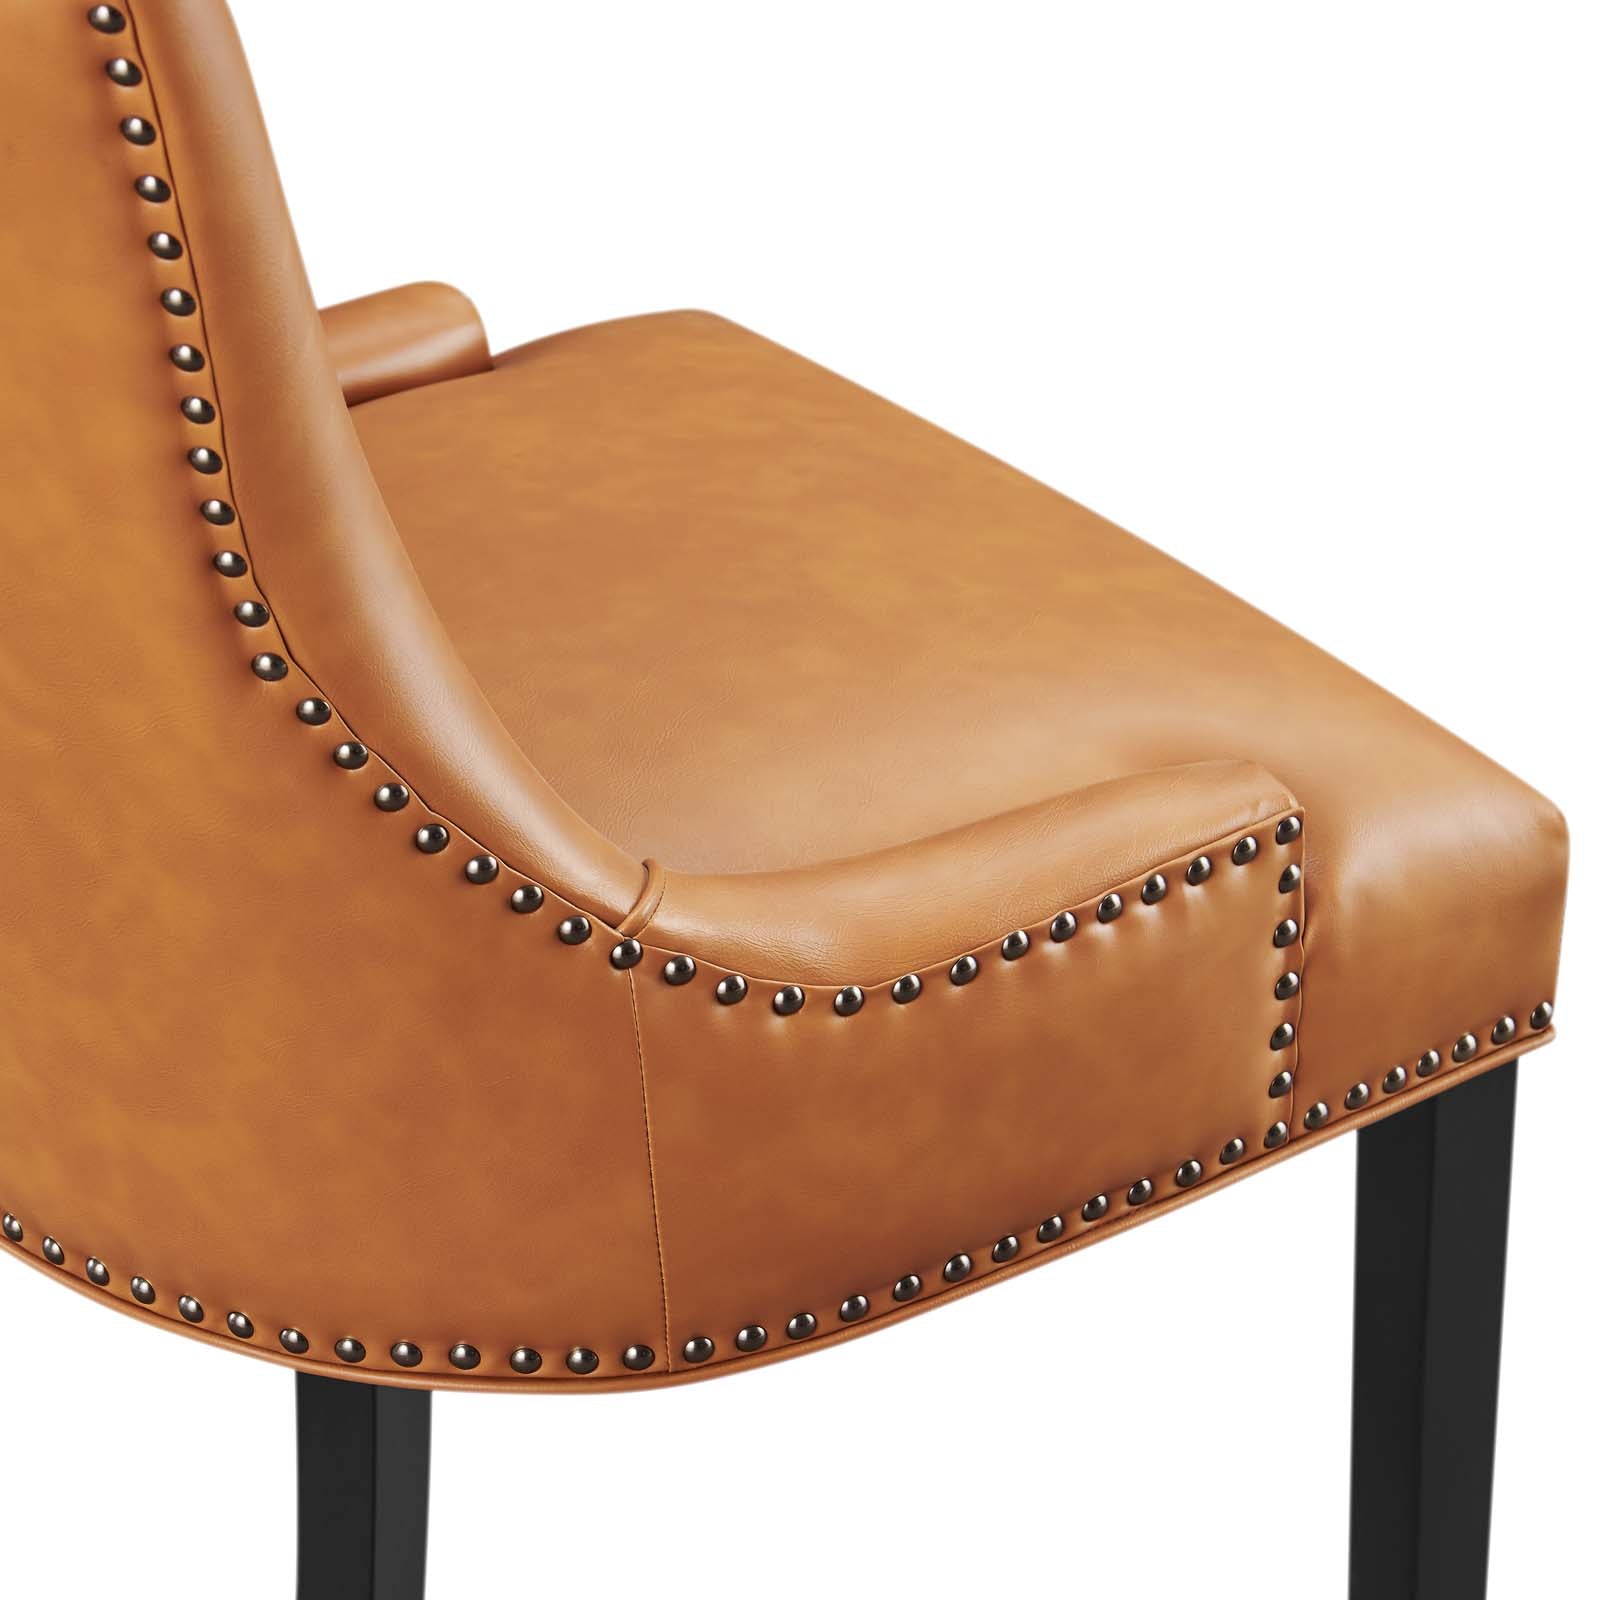 Marquis Vegan Leather Dining Chair - East Shore Modern Home Furnishings